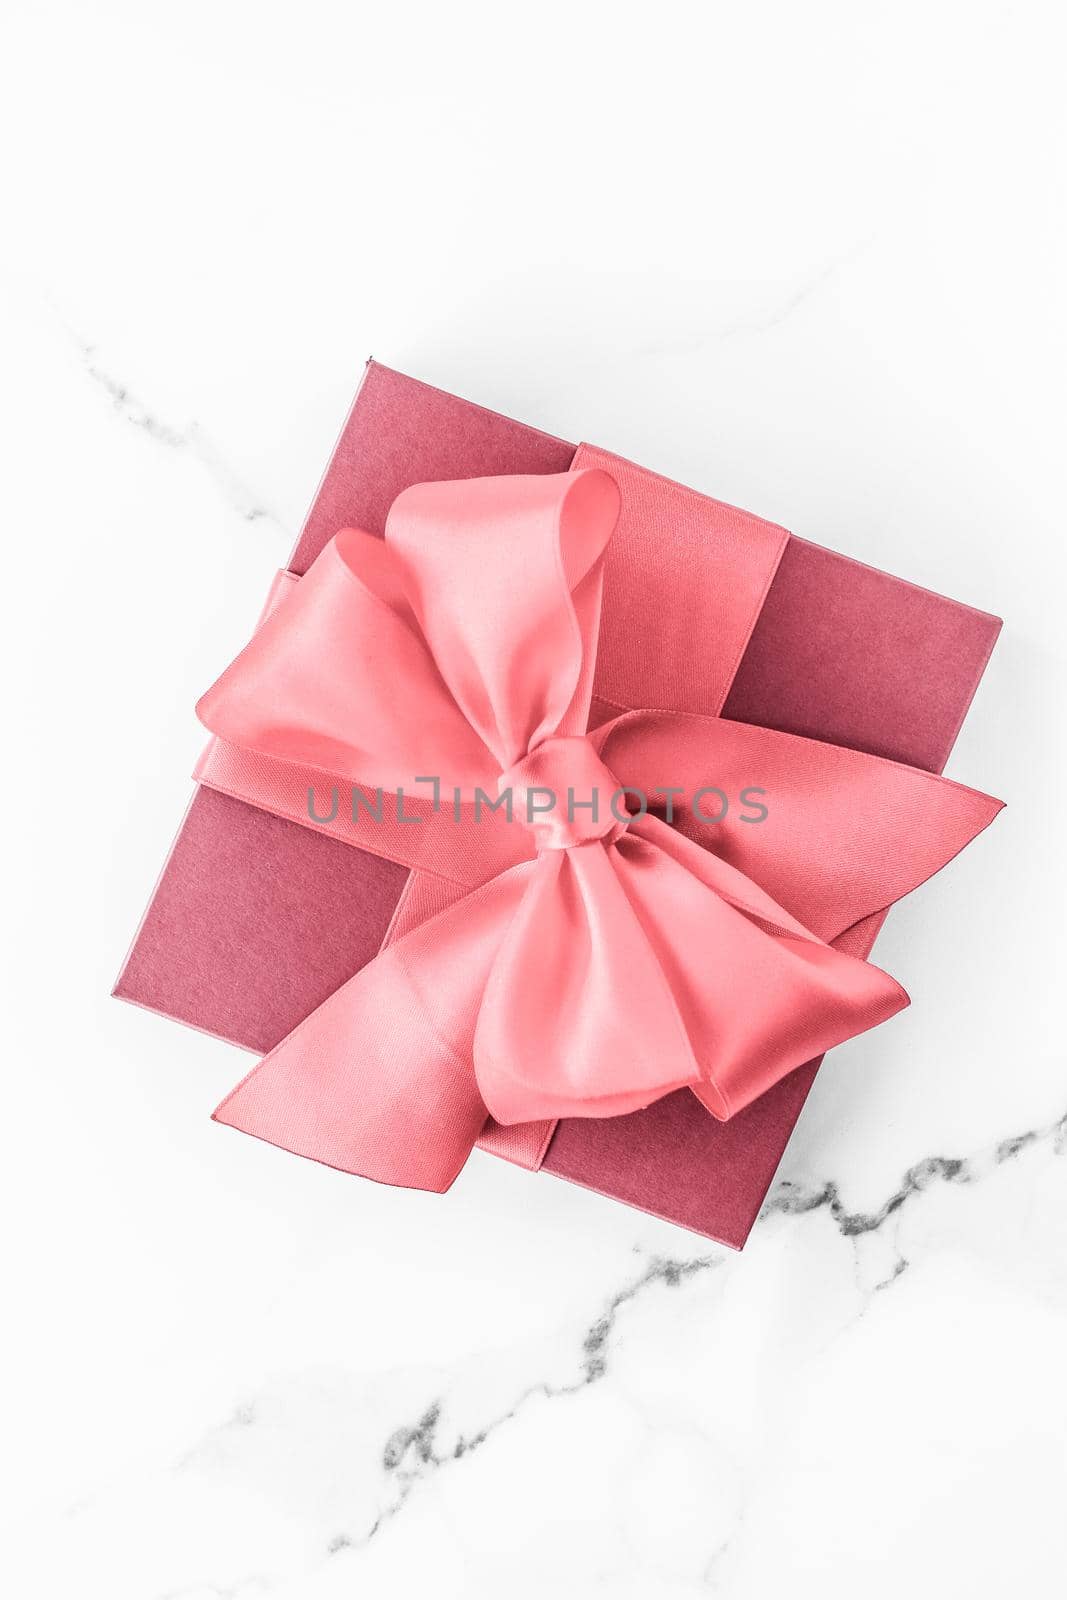 Birthday, wedding and girly branding concept - Coral gift box with silk bow on marble background, girl baby shower present and glamour fashion gift for luxury beauty brand, holiday flatlay art design